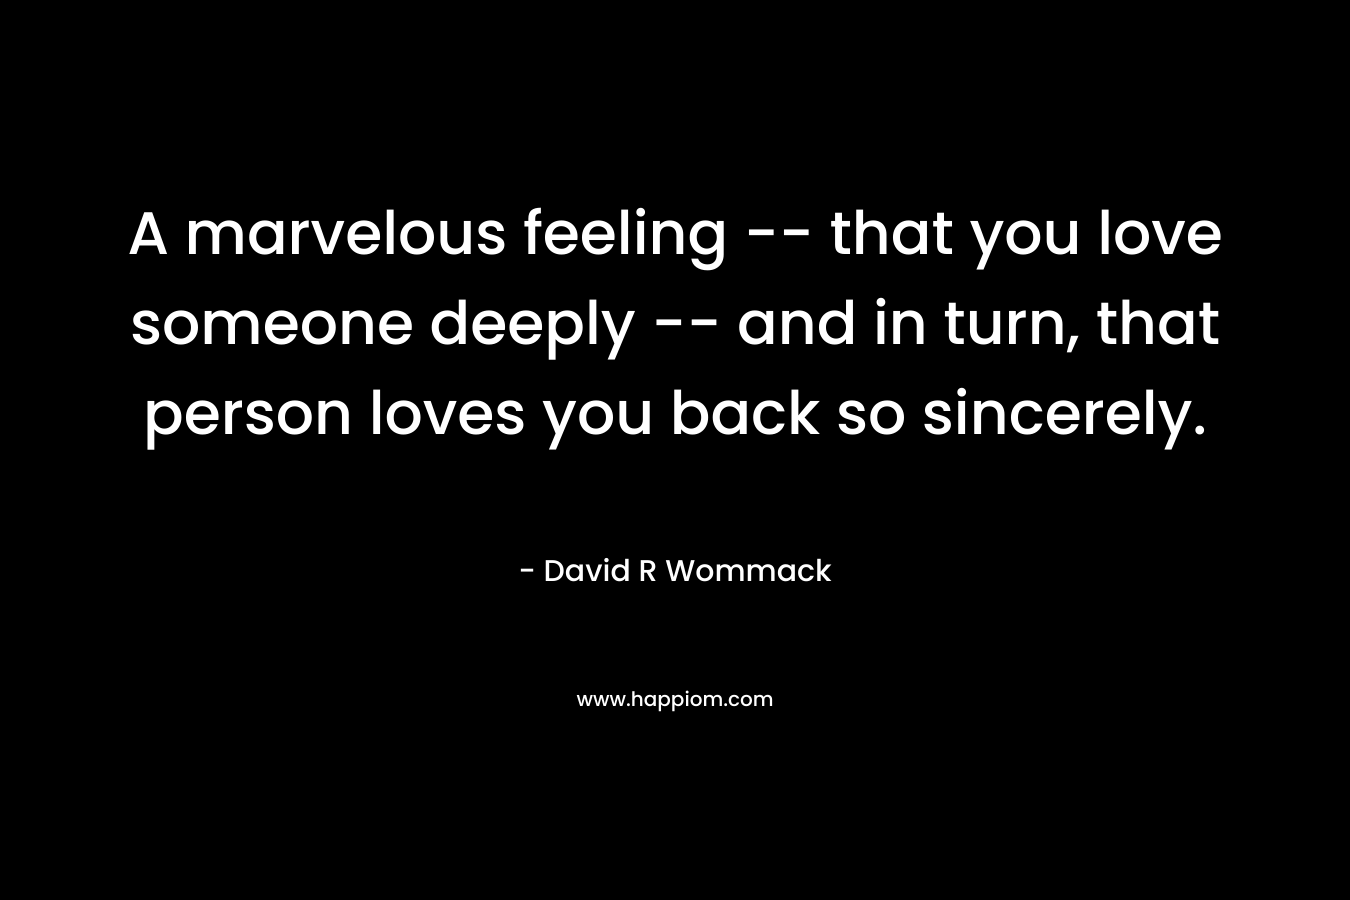 A marvelous feeling -- that you love someone deeply -- and in turn, that person loves you back so sincerely.